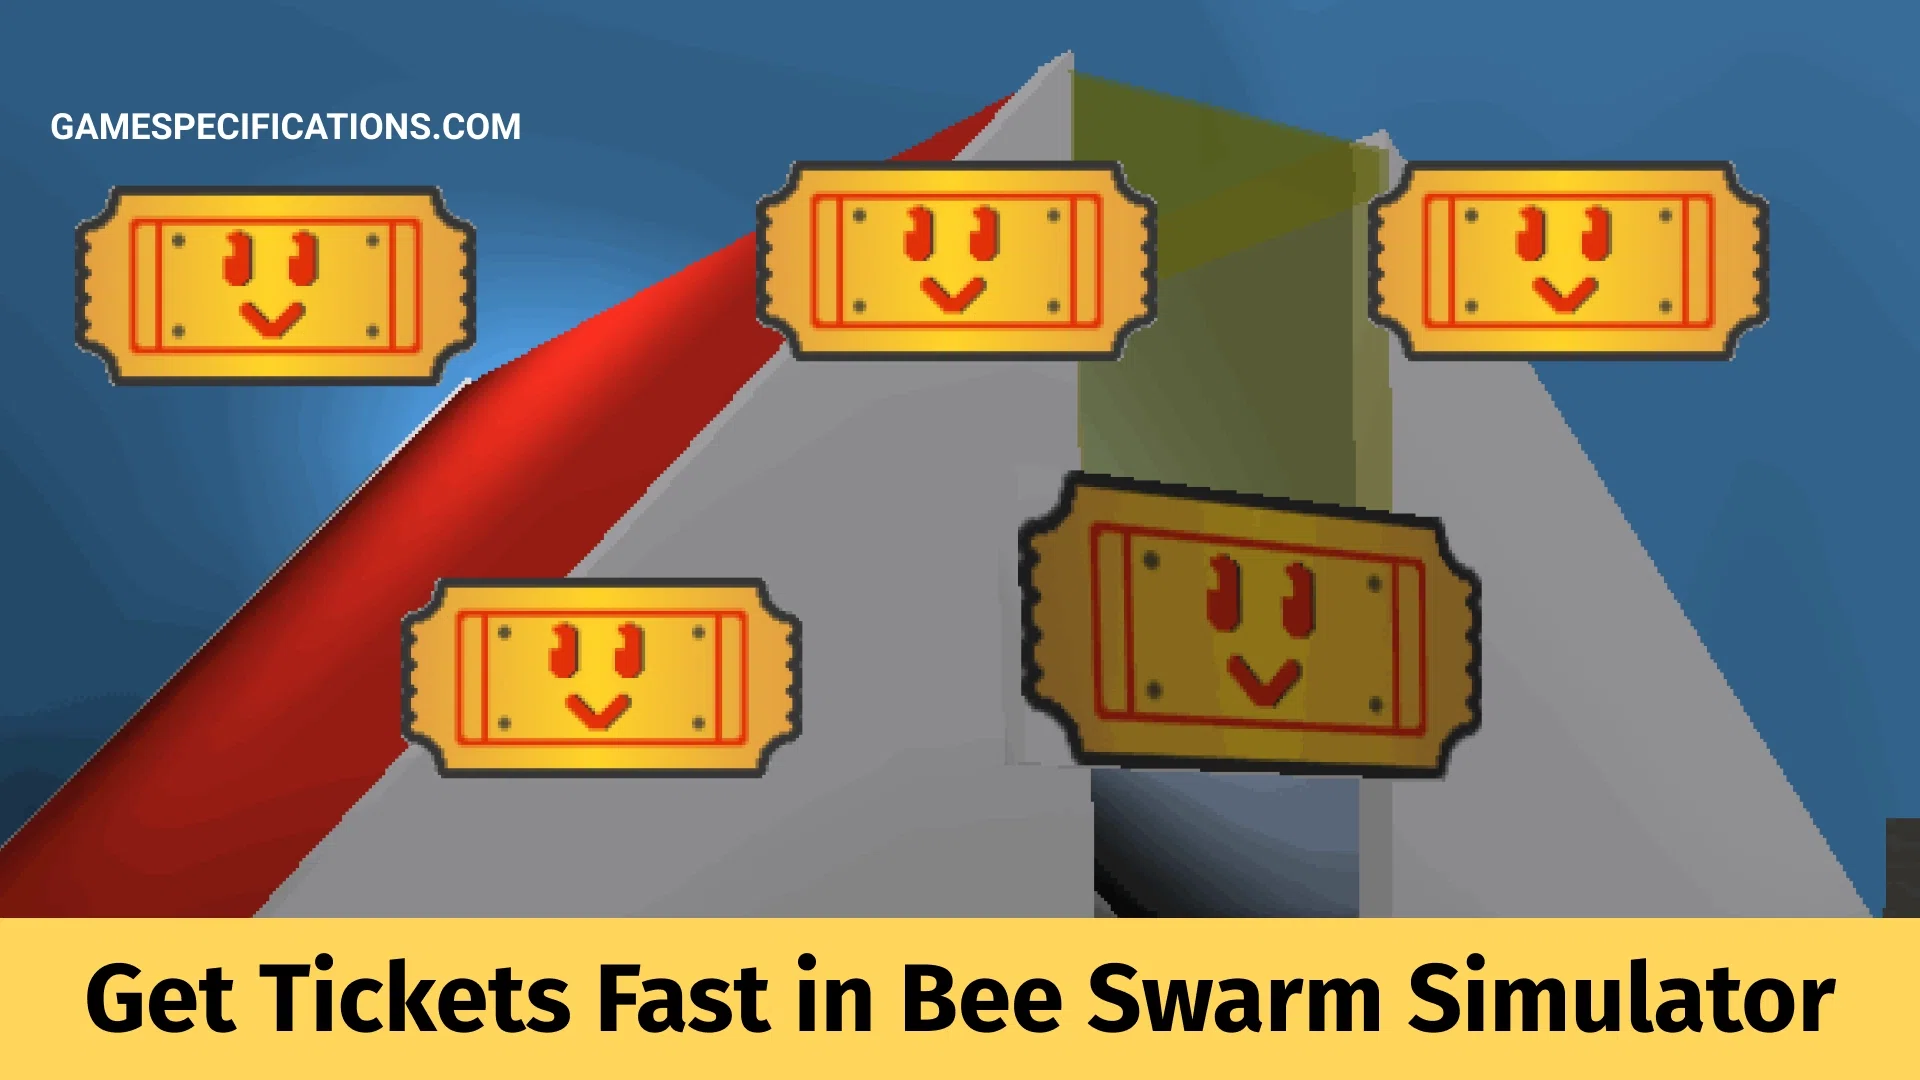 How To Get Tickets Fast In Bee Swarm Simulator - Game Specifications